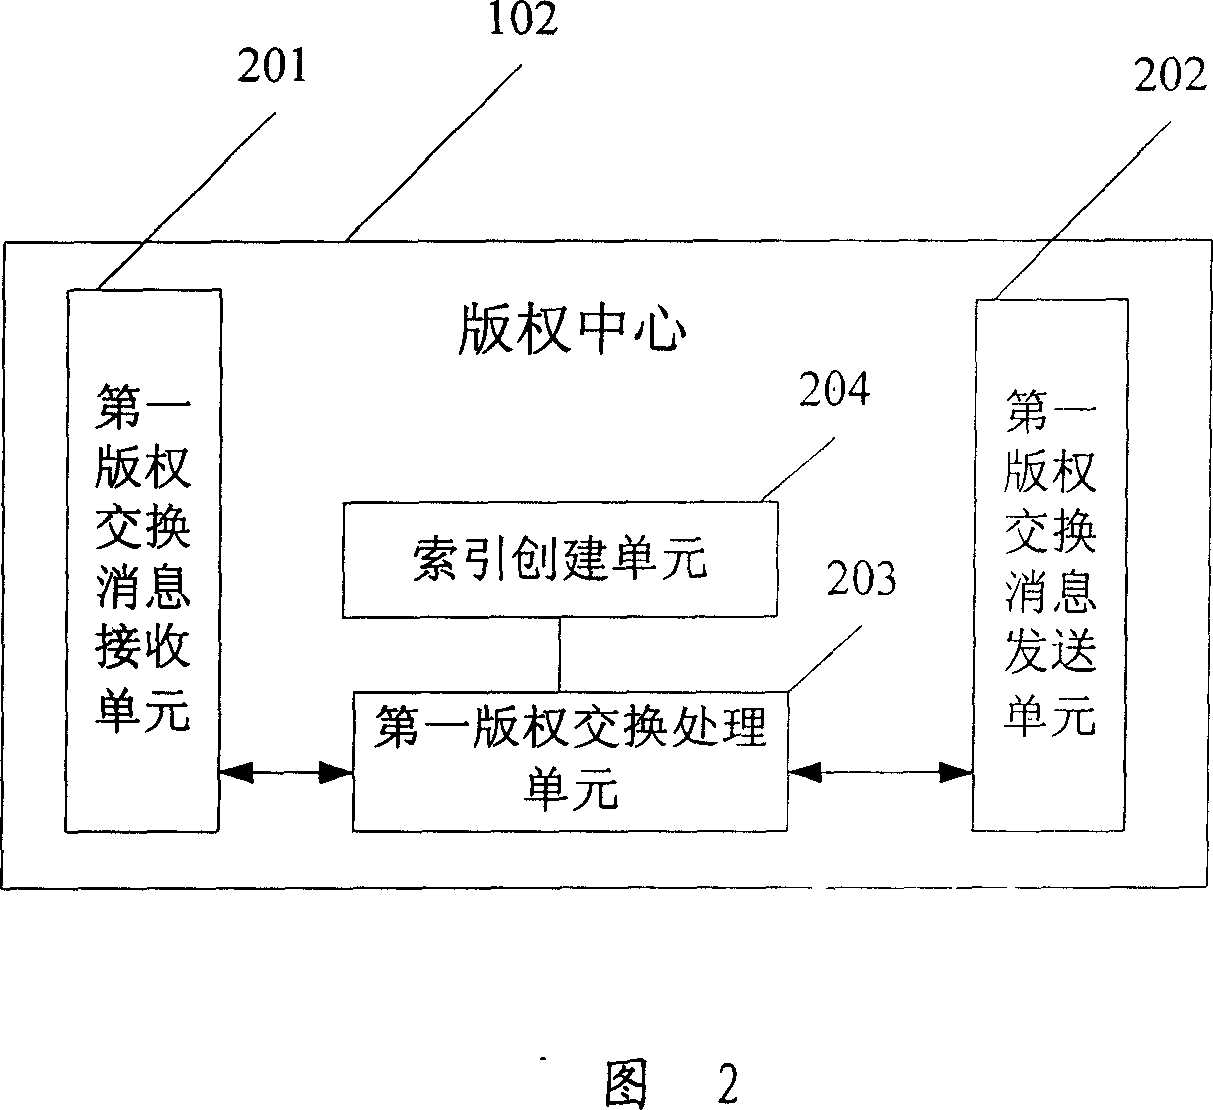 Method and system for replacing copyright object in digital copyright management system